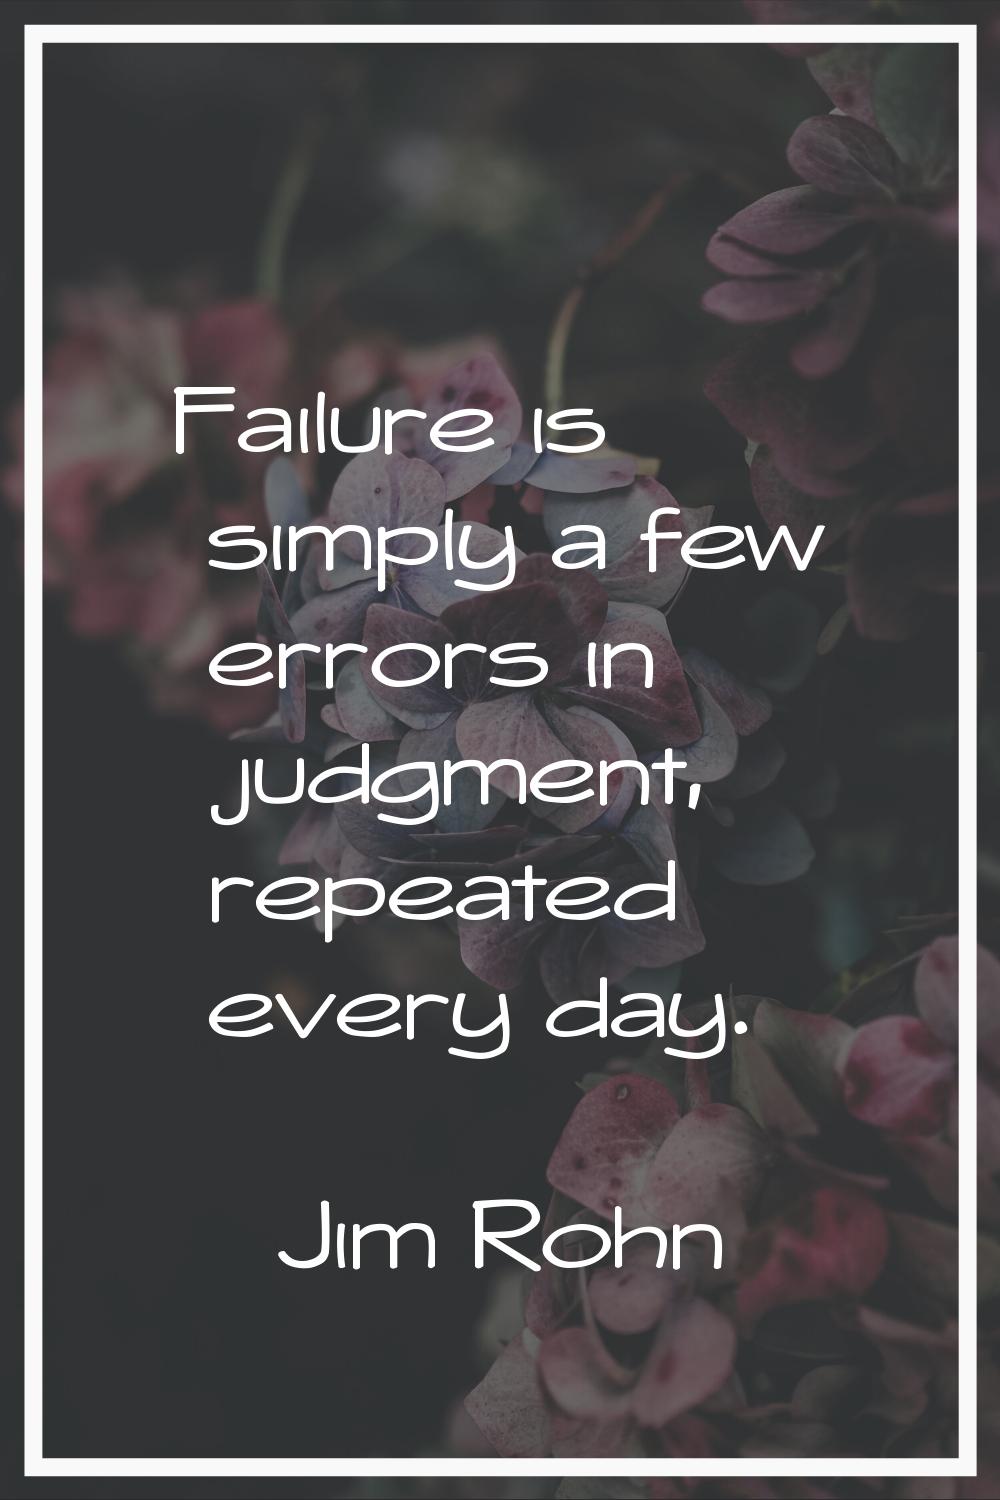 Failure is simply a few errors in judgment, repeated every day.